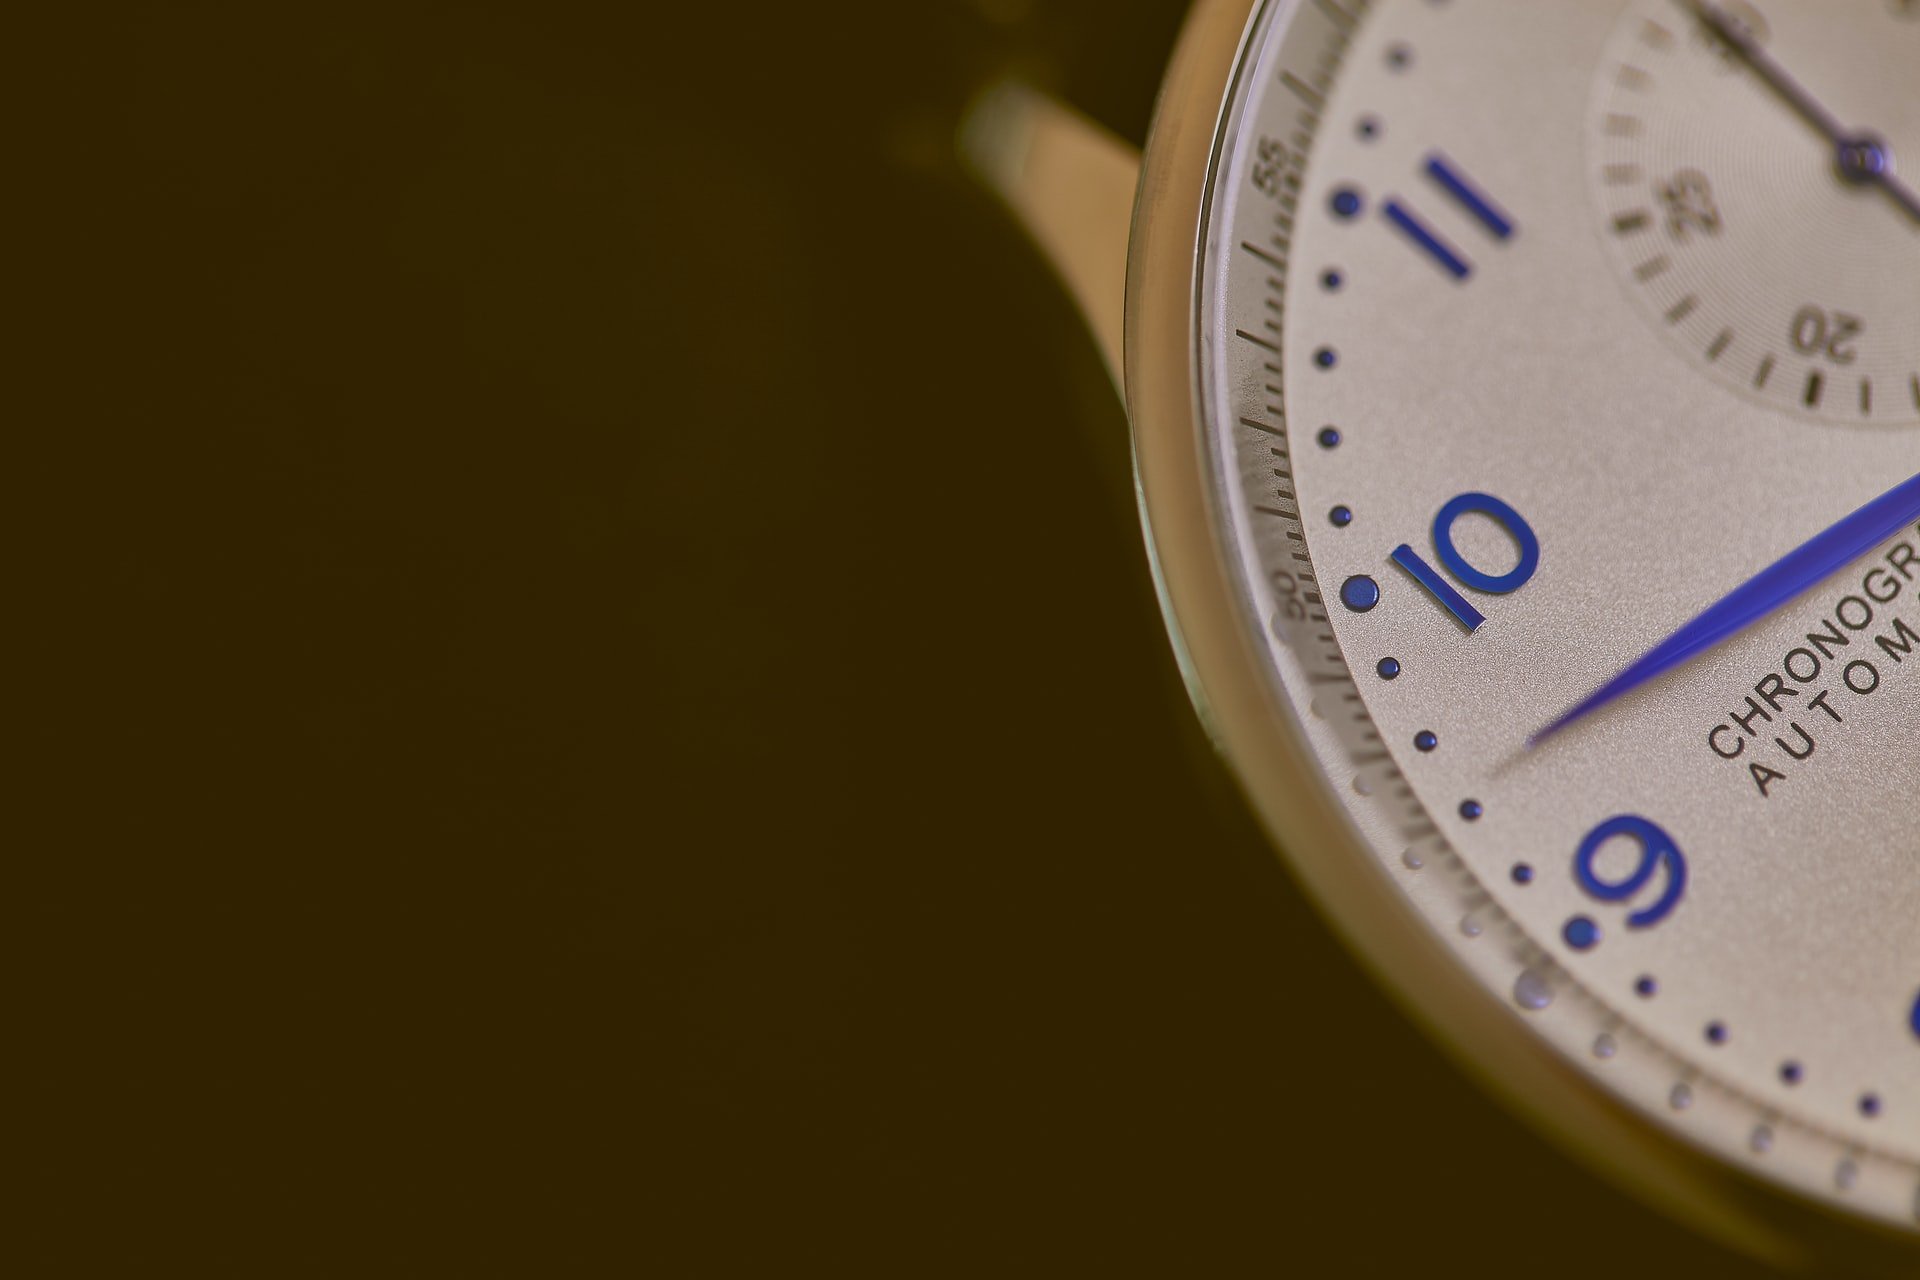 The "hourly rate" dilemma - selling value instead of time